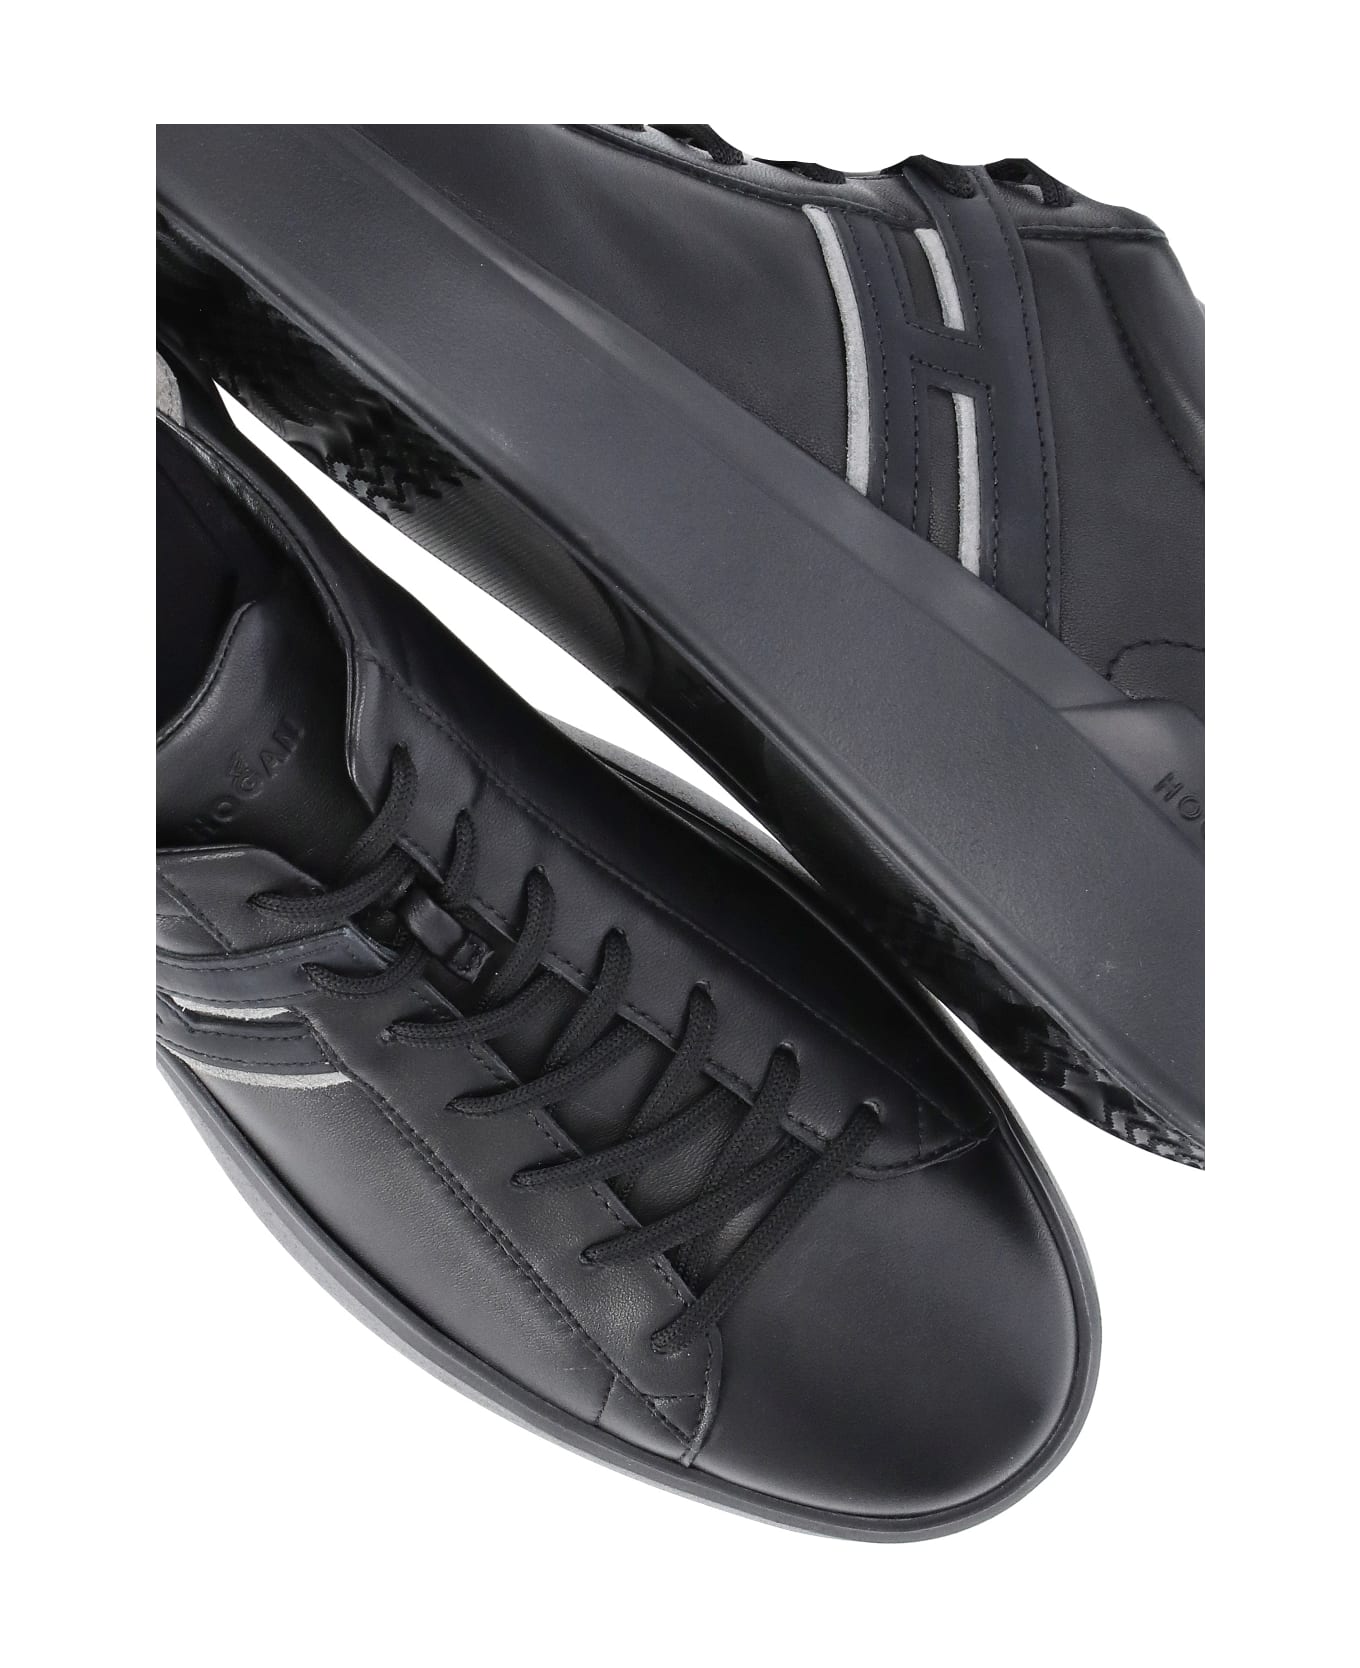 Hogan H580 Lace-up Sneakers - Black